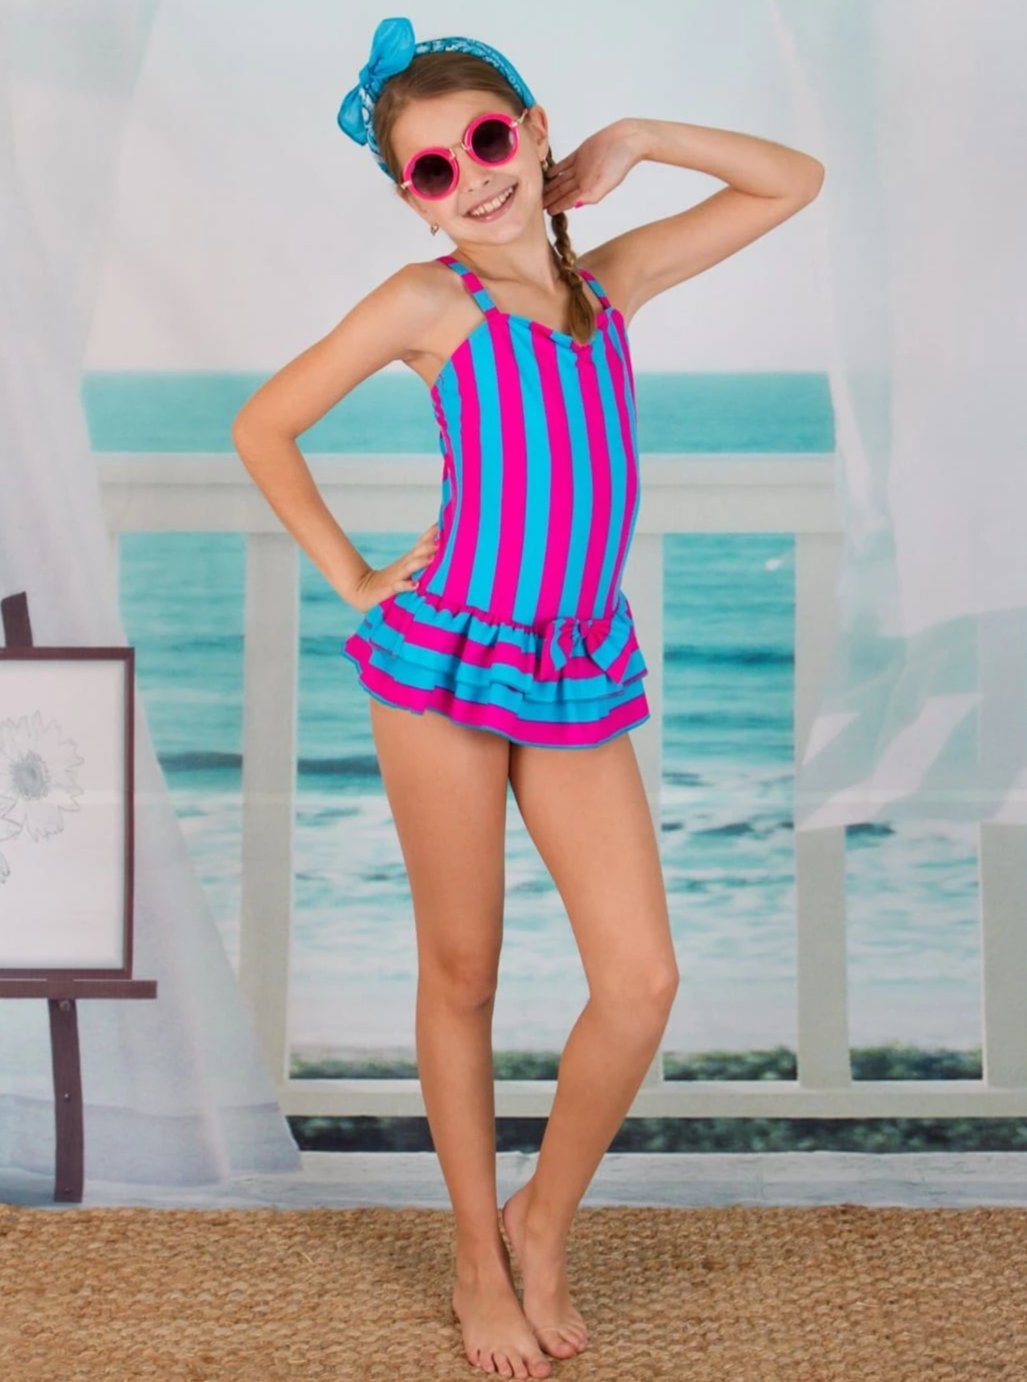 Girls Skirted Striped One Piece Swimsuit - Girls One Piece Swimsuit